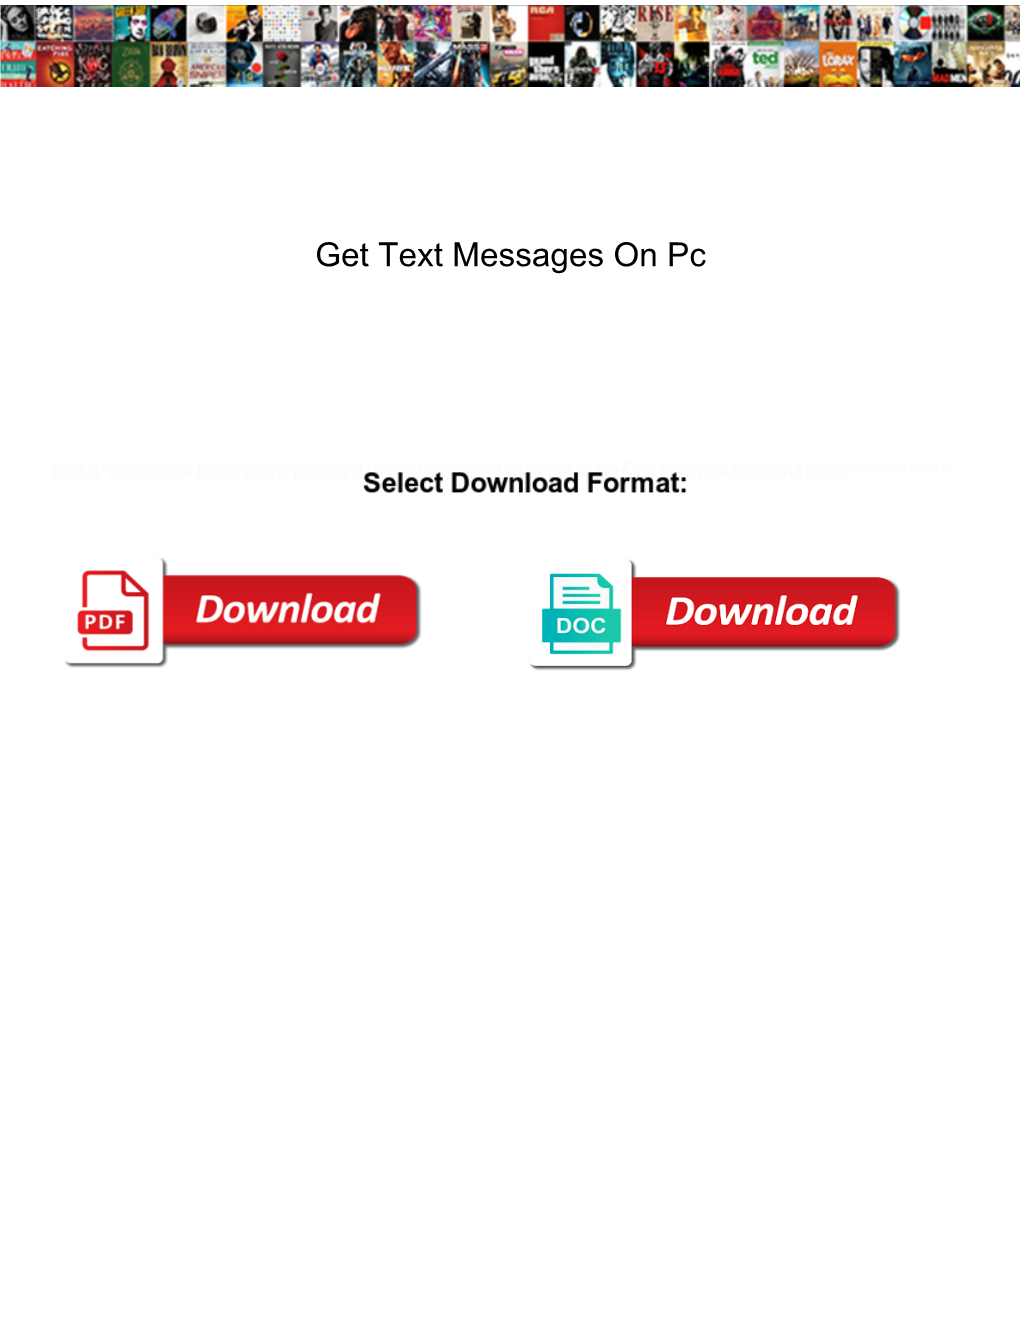 Get Text Messages on Pc